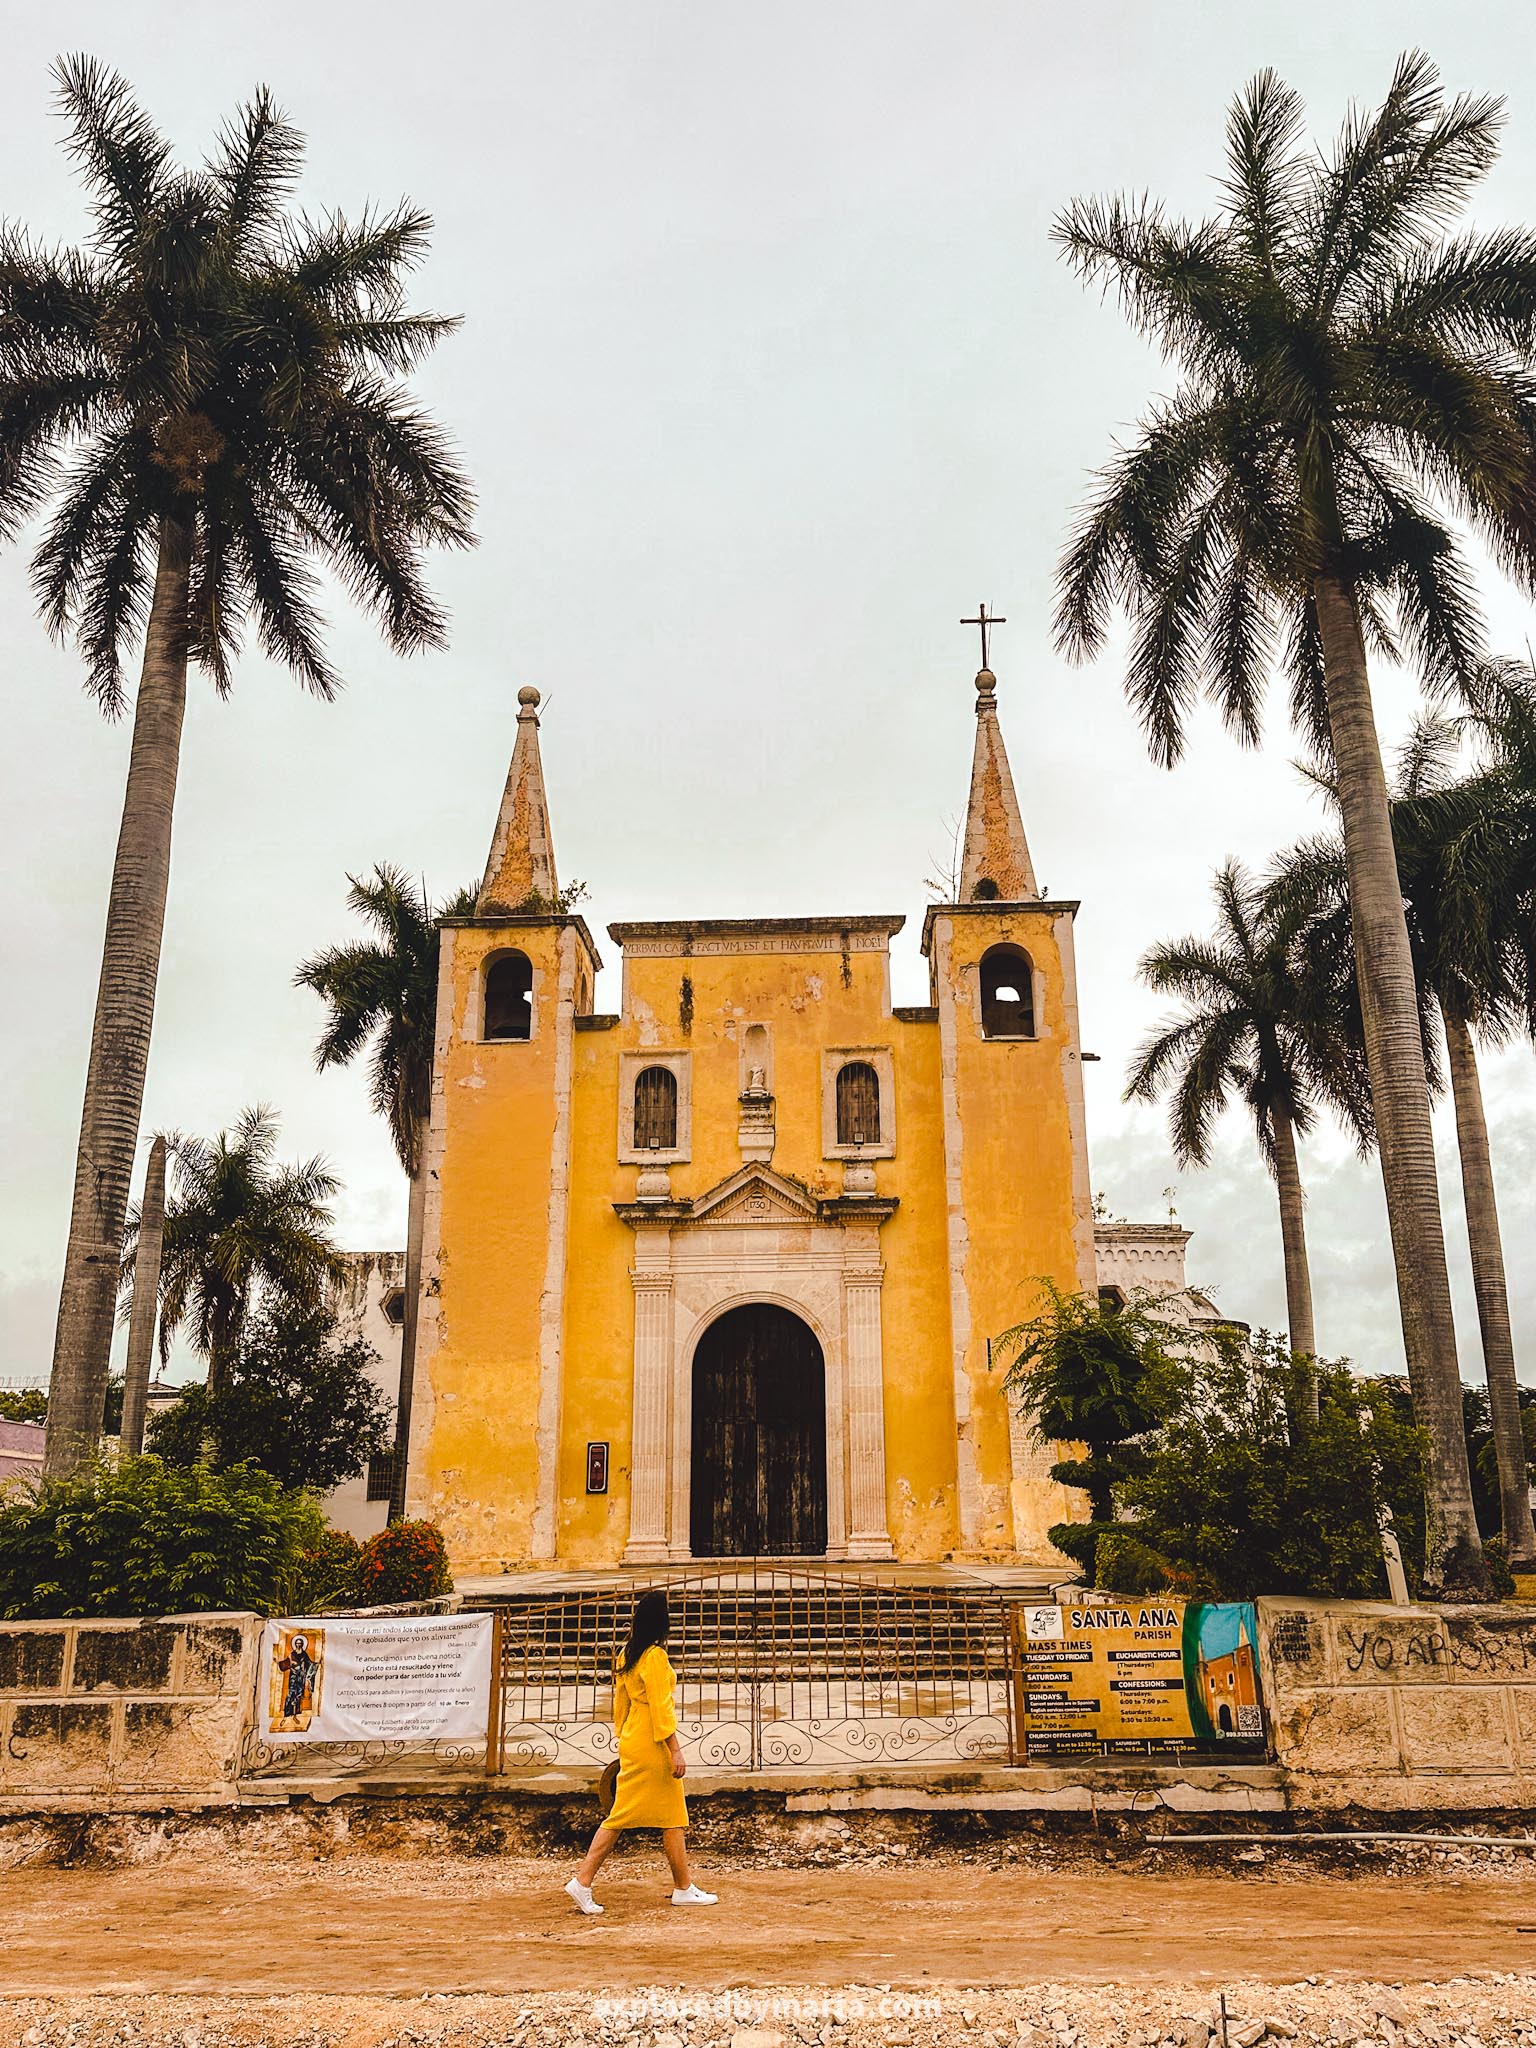 Merida, Mexico-photo perfect colorful houses and a yellow church with two spires in Parque de Santa Ana in Merida, Mexico